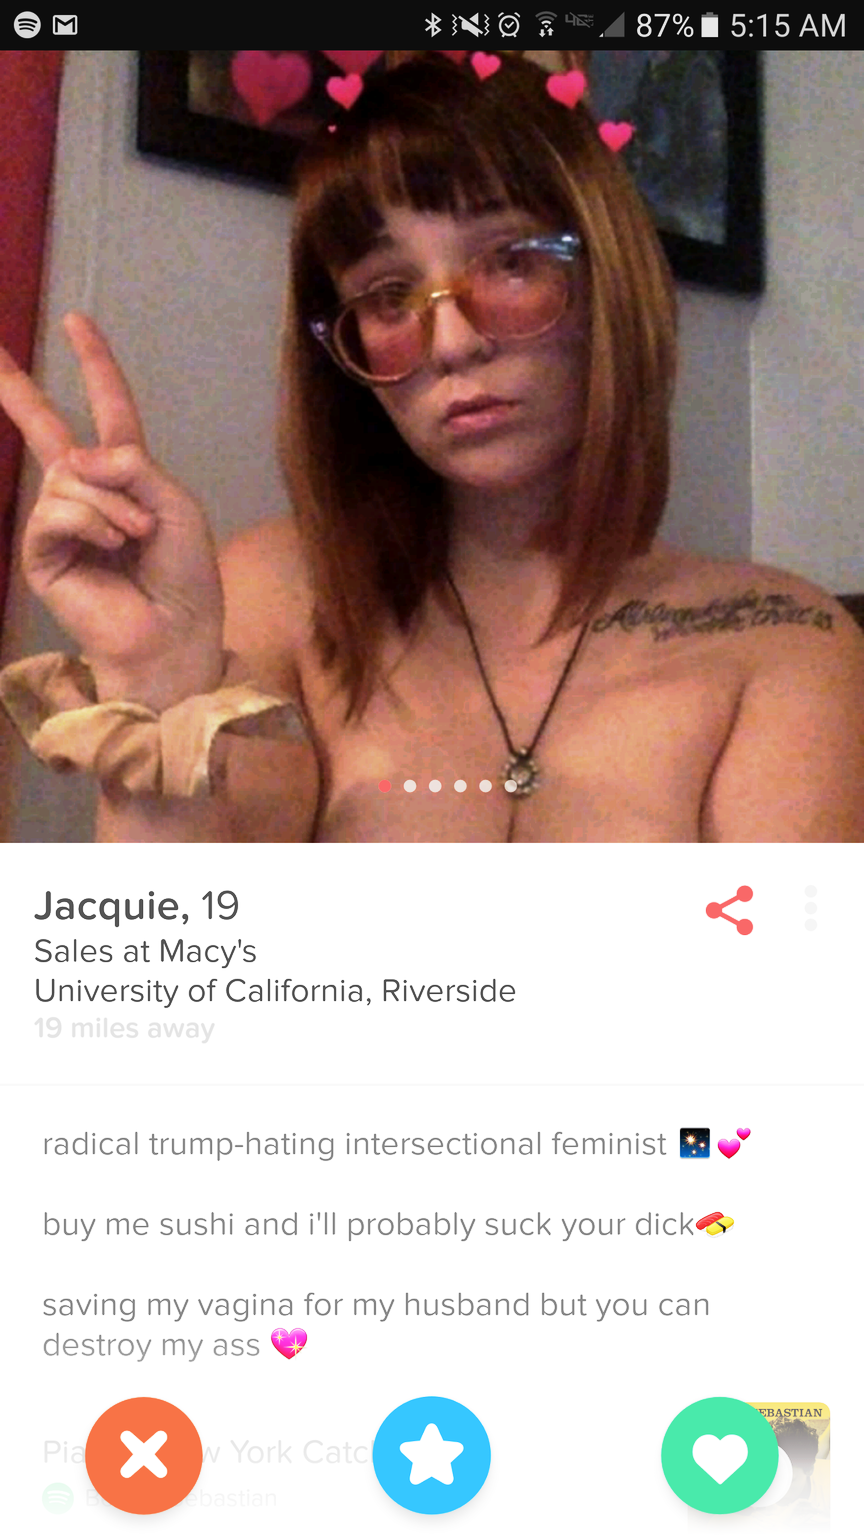 butt stuff girl - No 87% Jacquie, 19 Sales at Macy's University of California, Riverside radical trumphating intersectional feminist buy me sushi and I'll probably suck your dicke saving my vagina for my husband but you can destroy my ass Xe